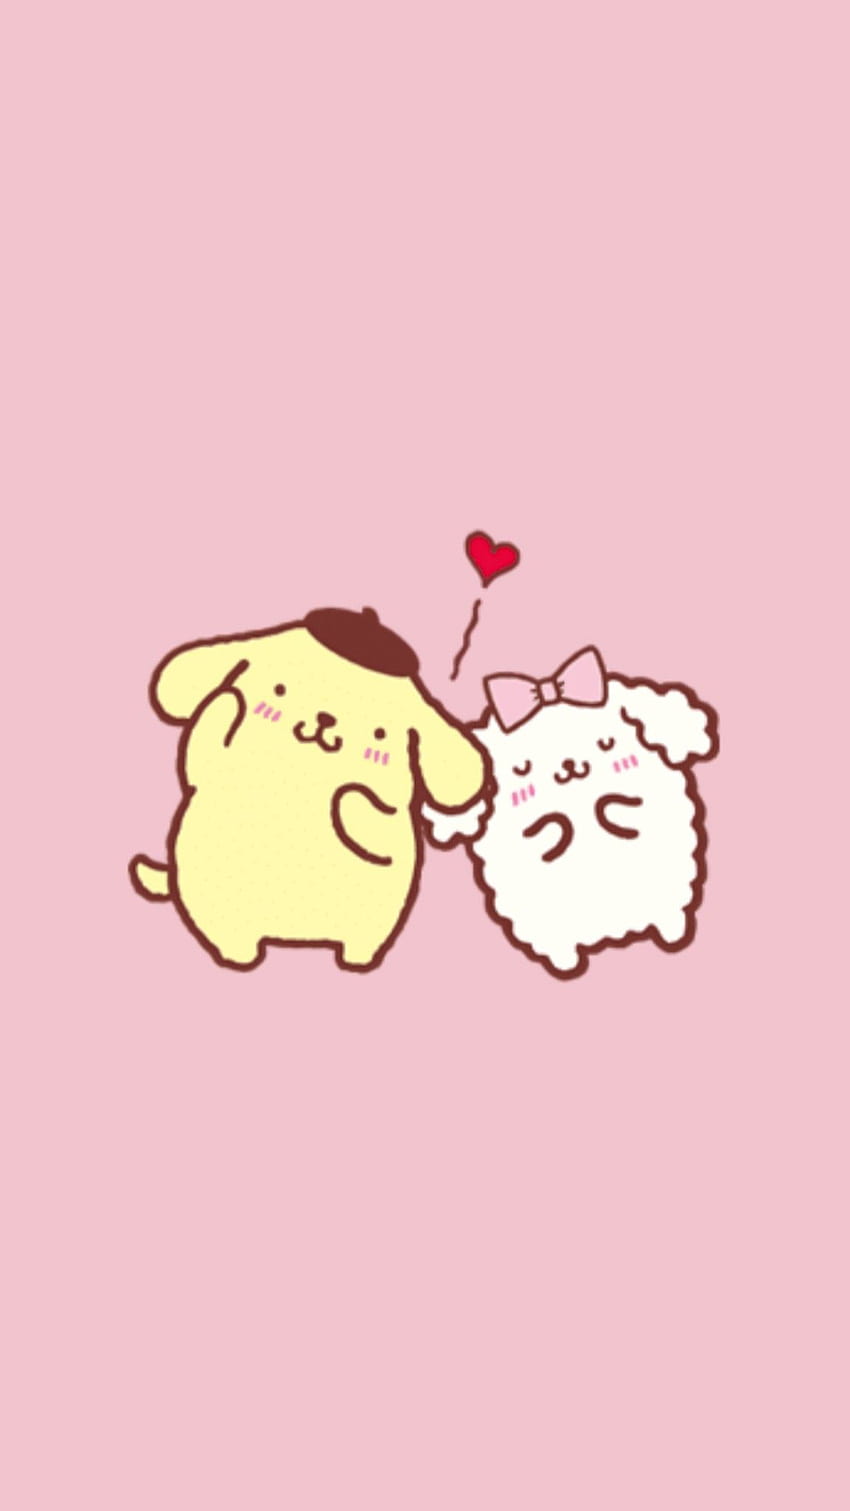 Pompompurin Wallpaper Discover more android cute desktop ipad iphone  wallpaper httpswwwnawpiccompom  Sanrio wallpaper Ipad wallpaper  Iphone wallpaper